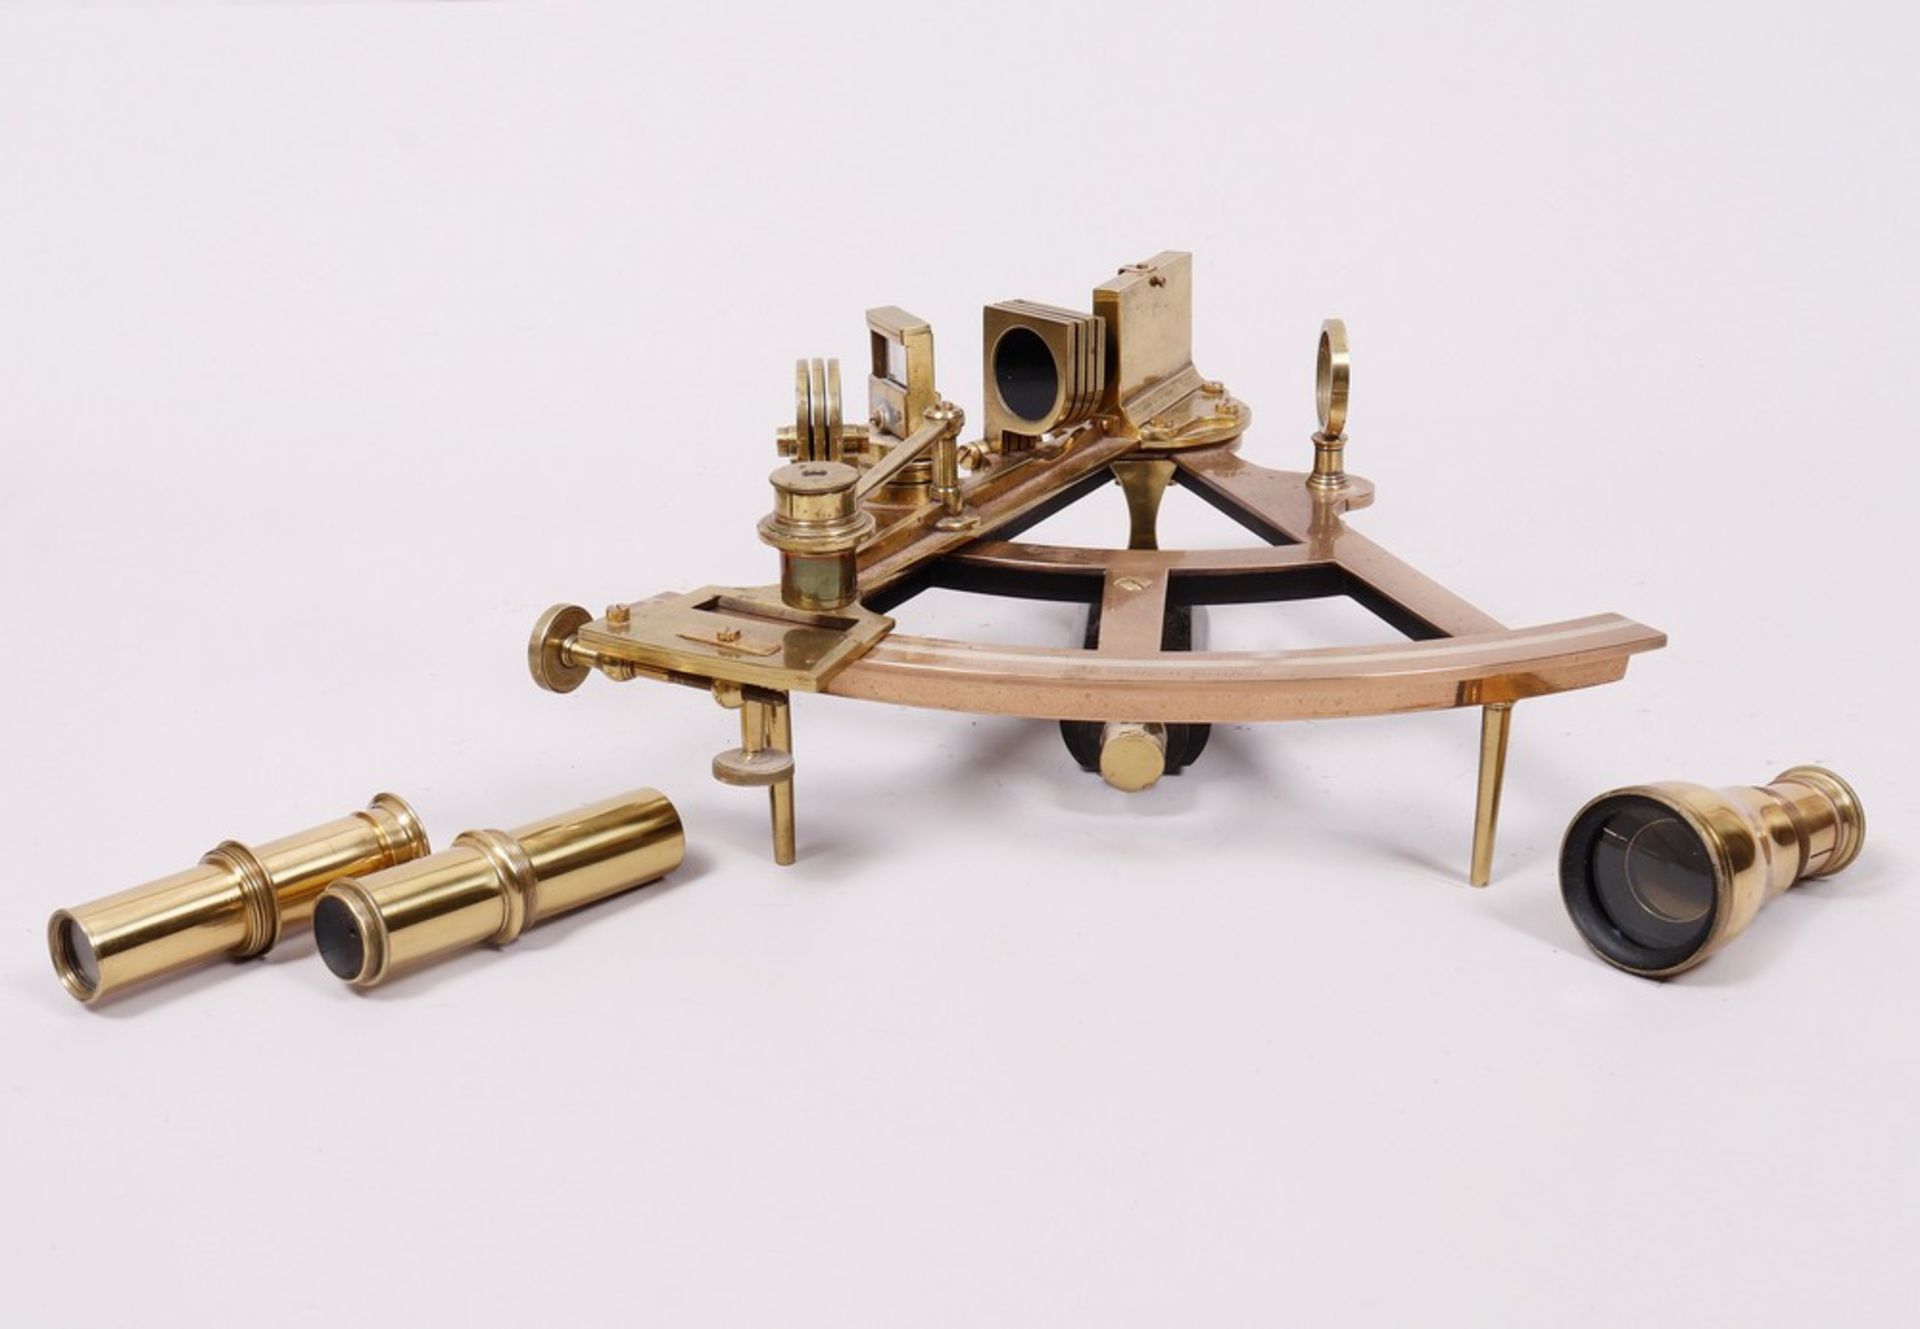 Sextant in transport box, Charles Piers, Liverpool, probably mid-19th C.